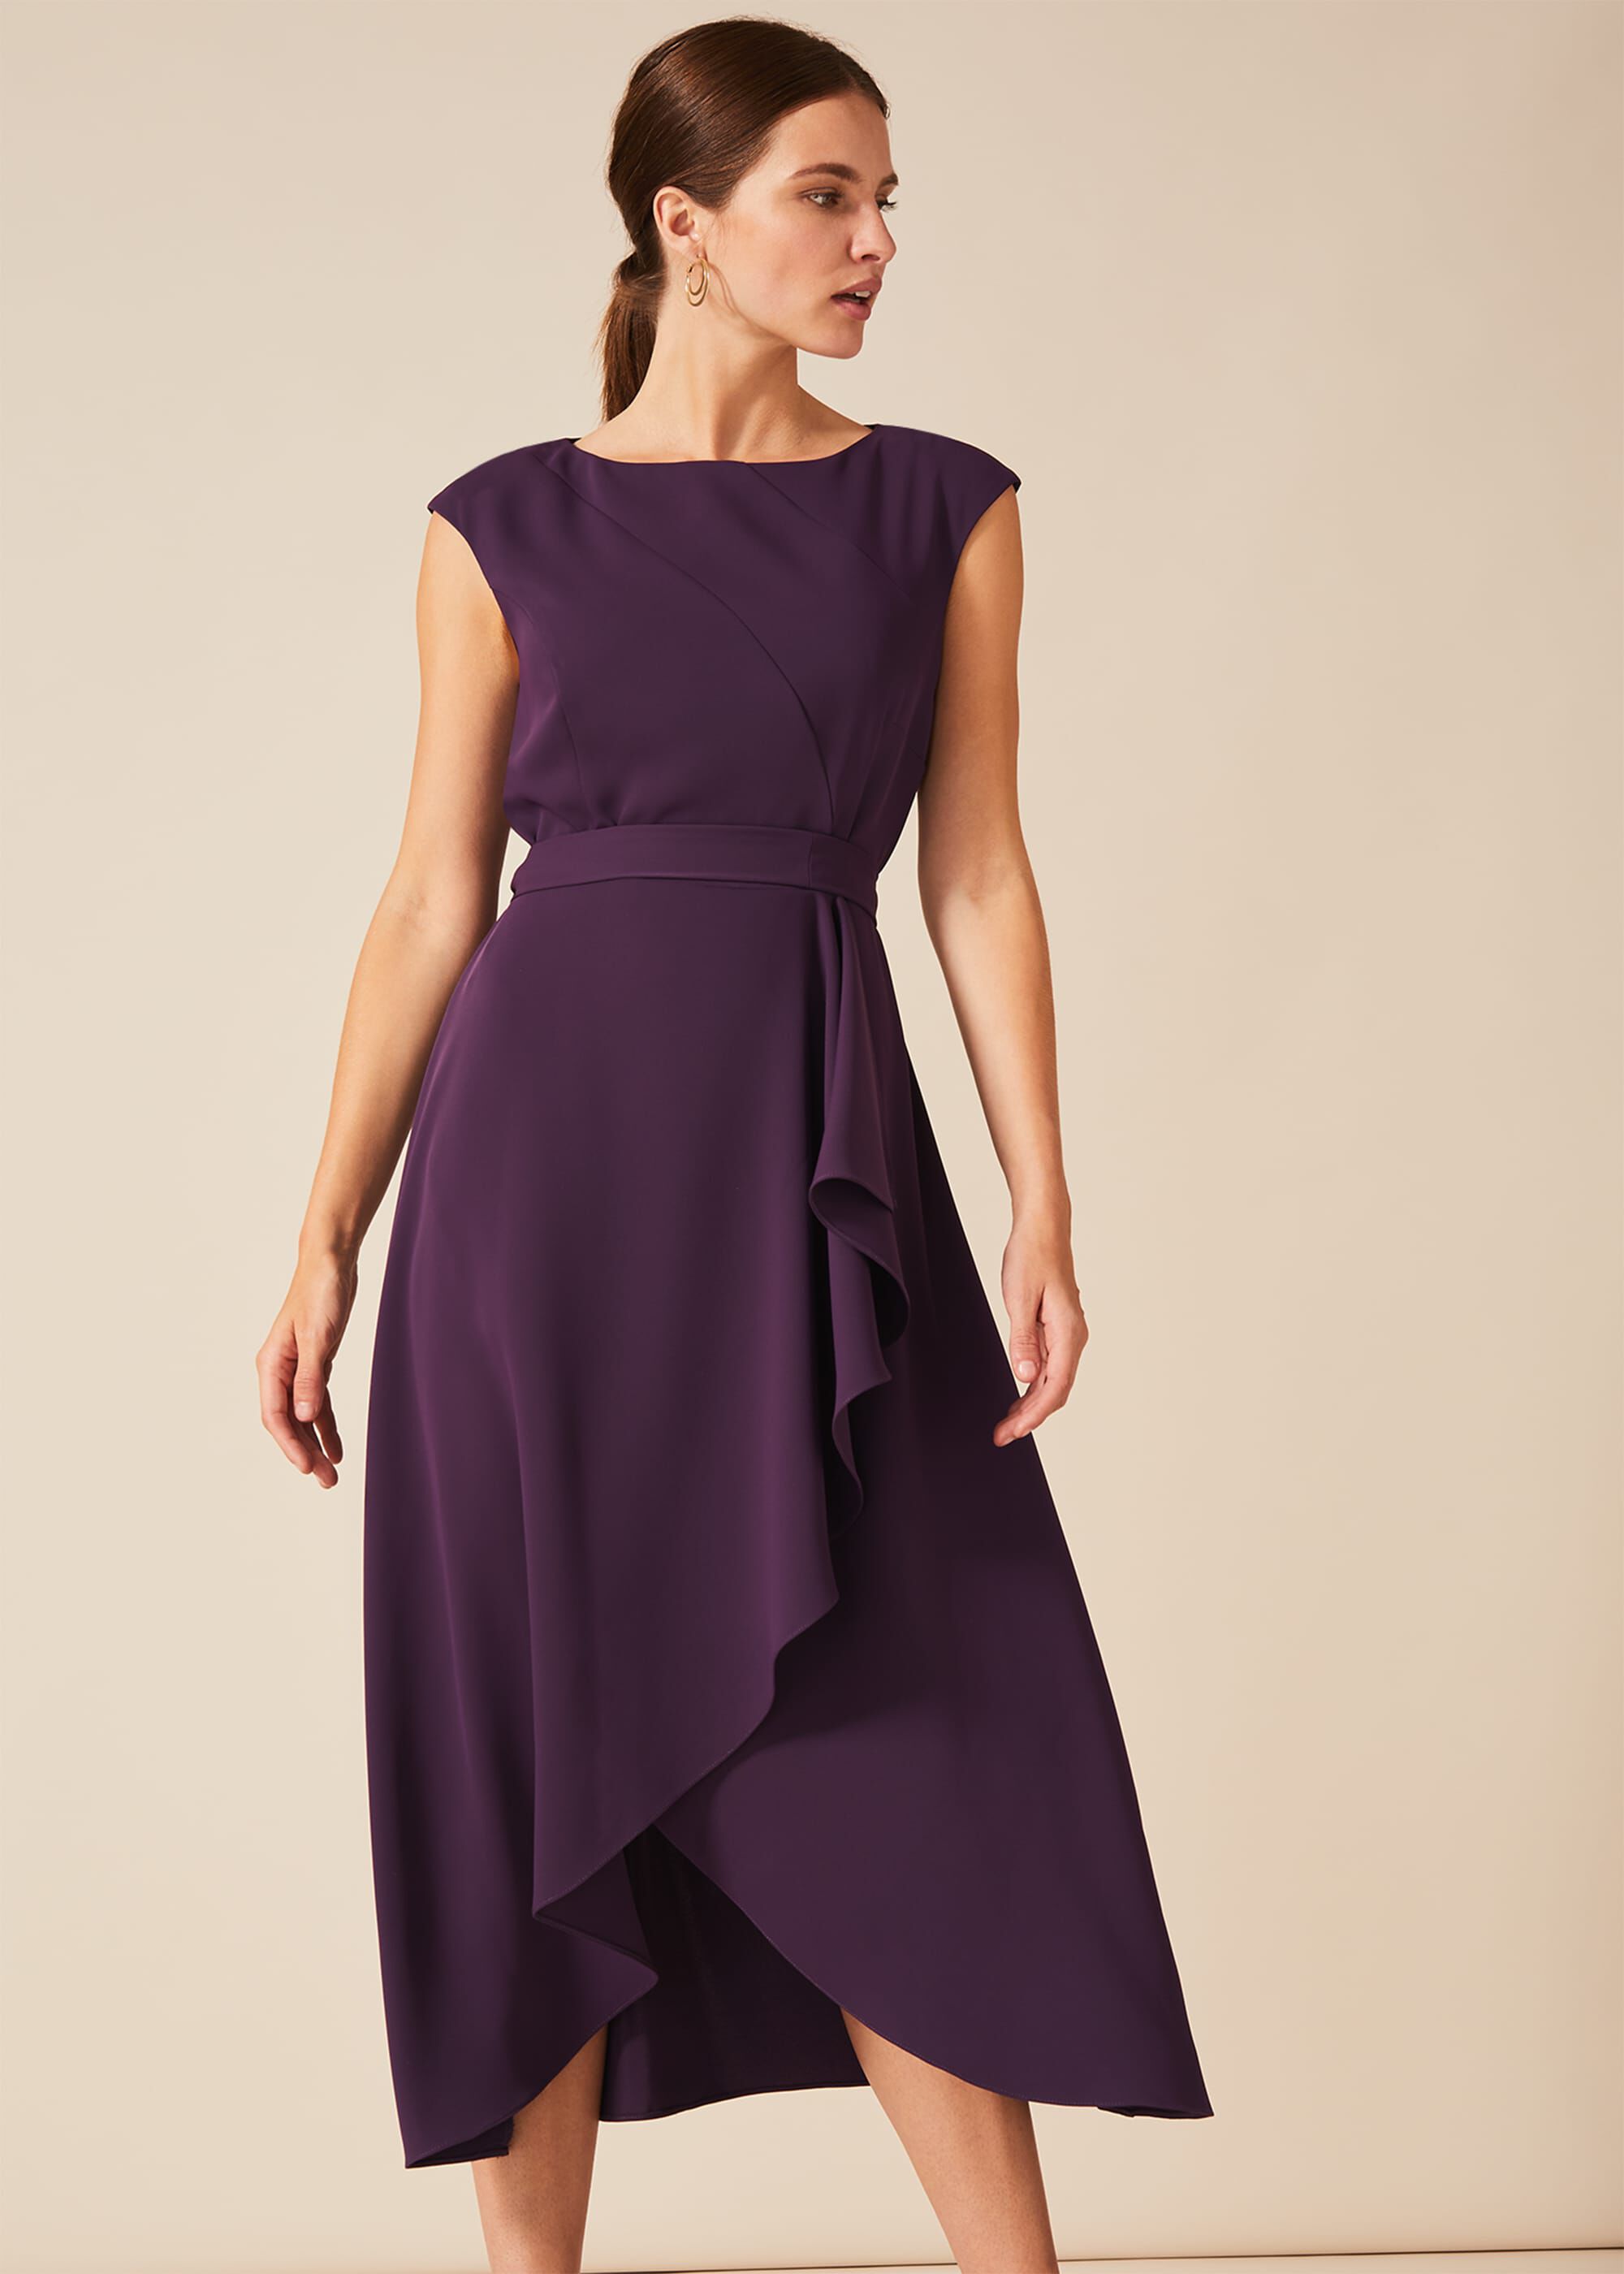 purple wedding guest outfits